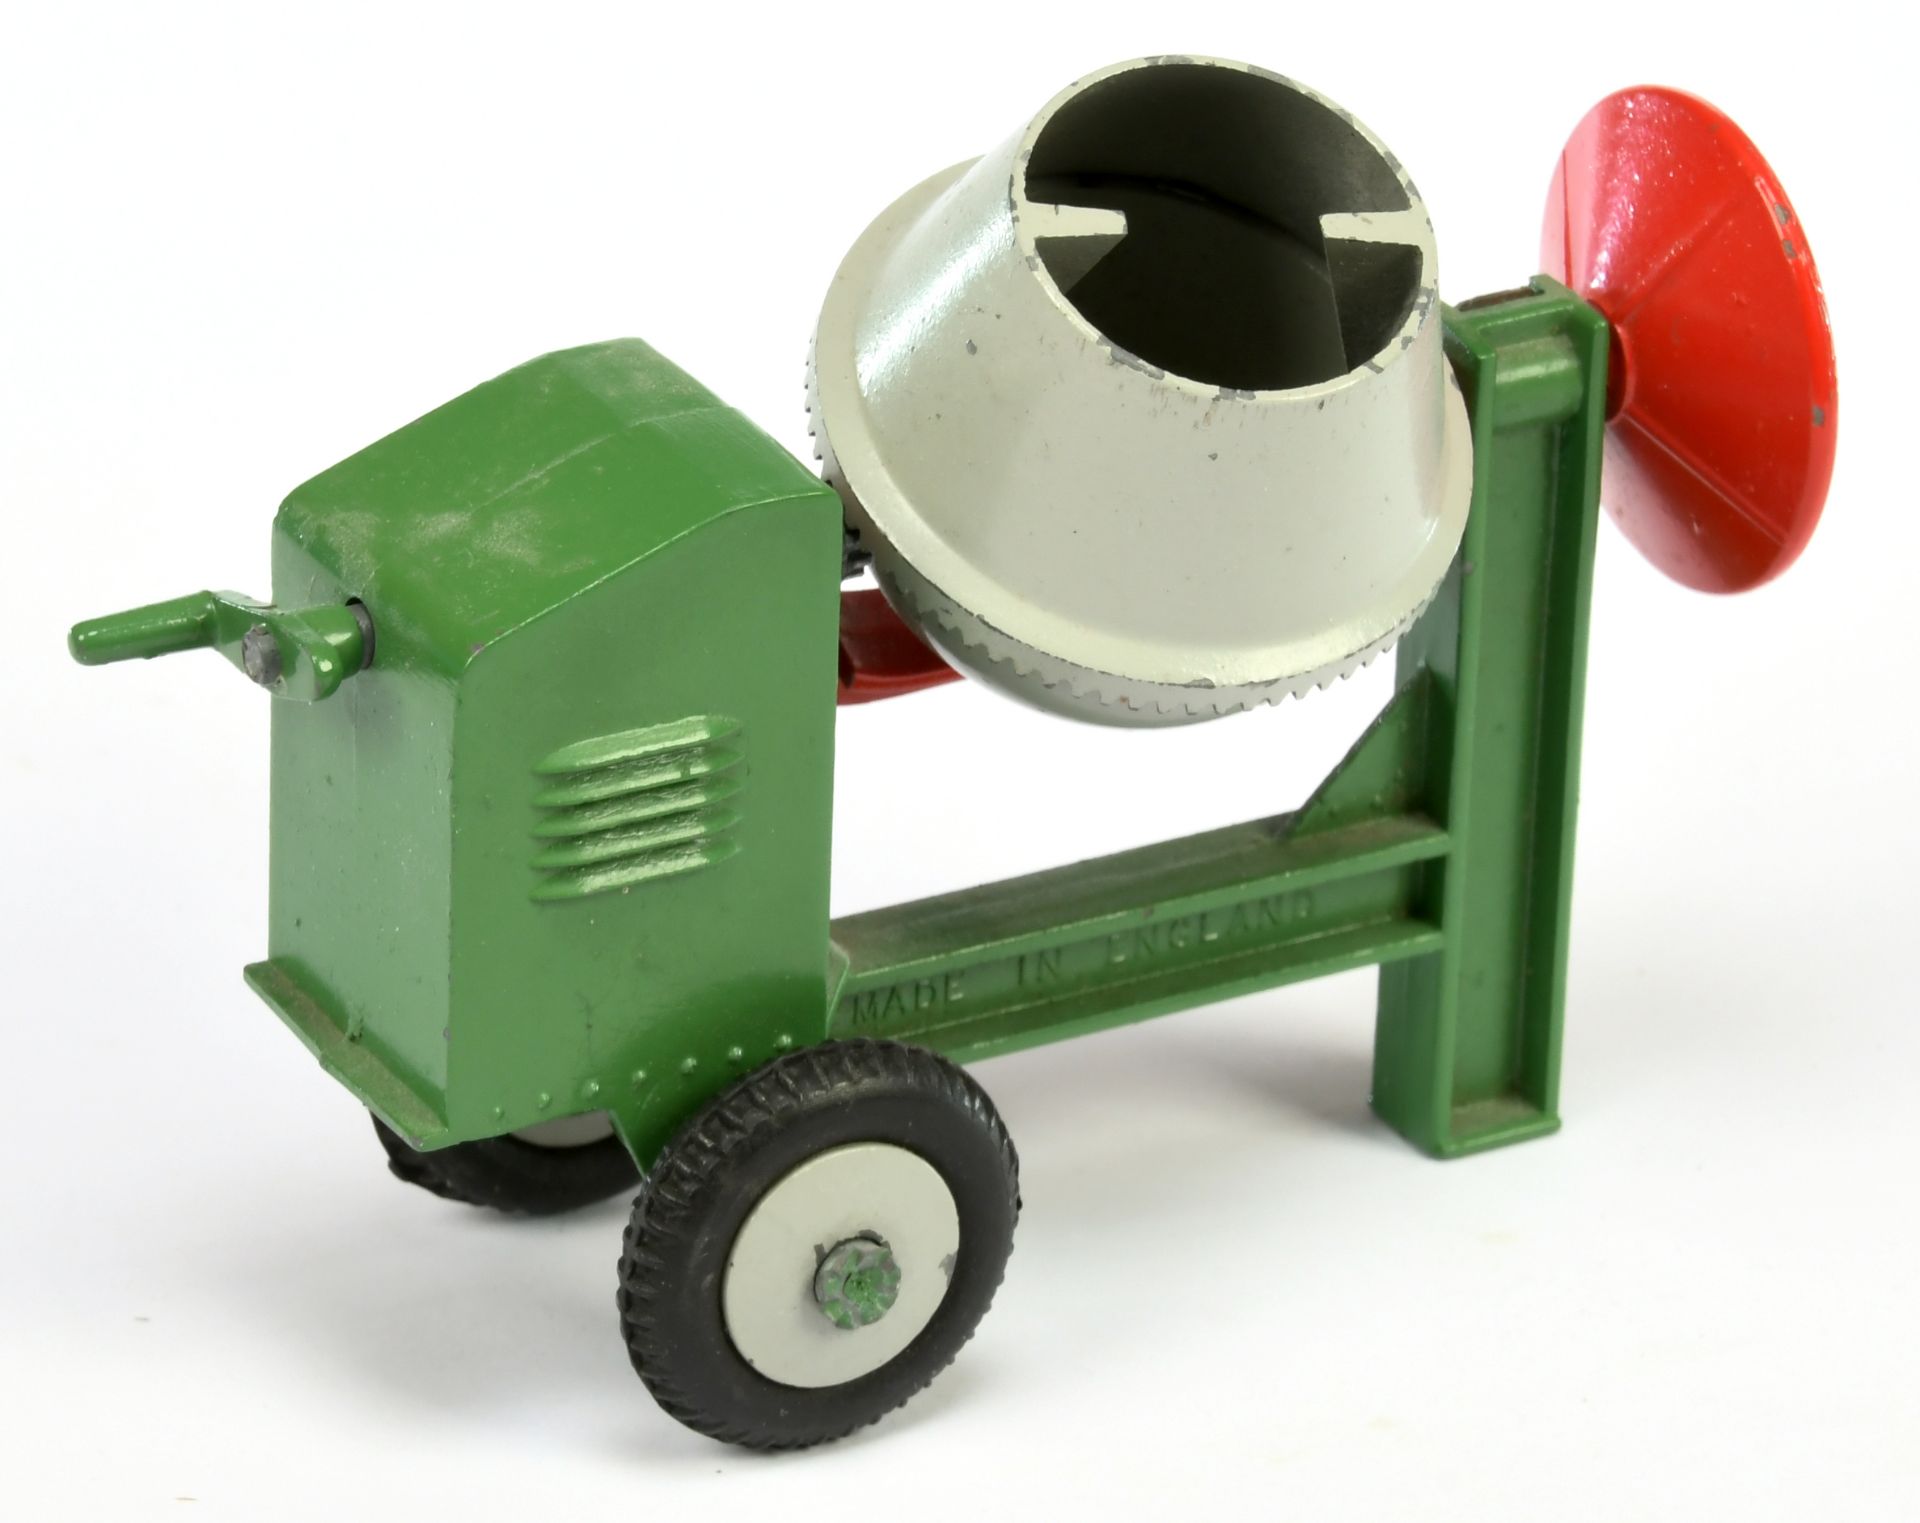 DCMT LTD Cement Mixer - Green, grey mixer and hubs, red including handle